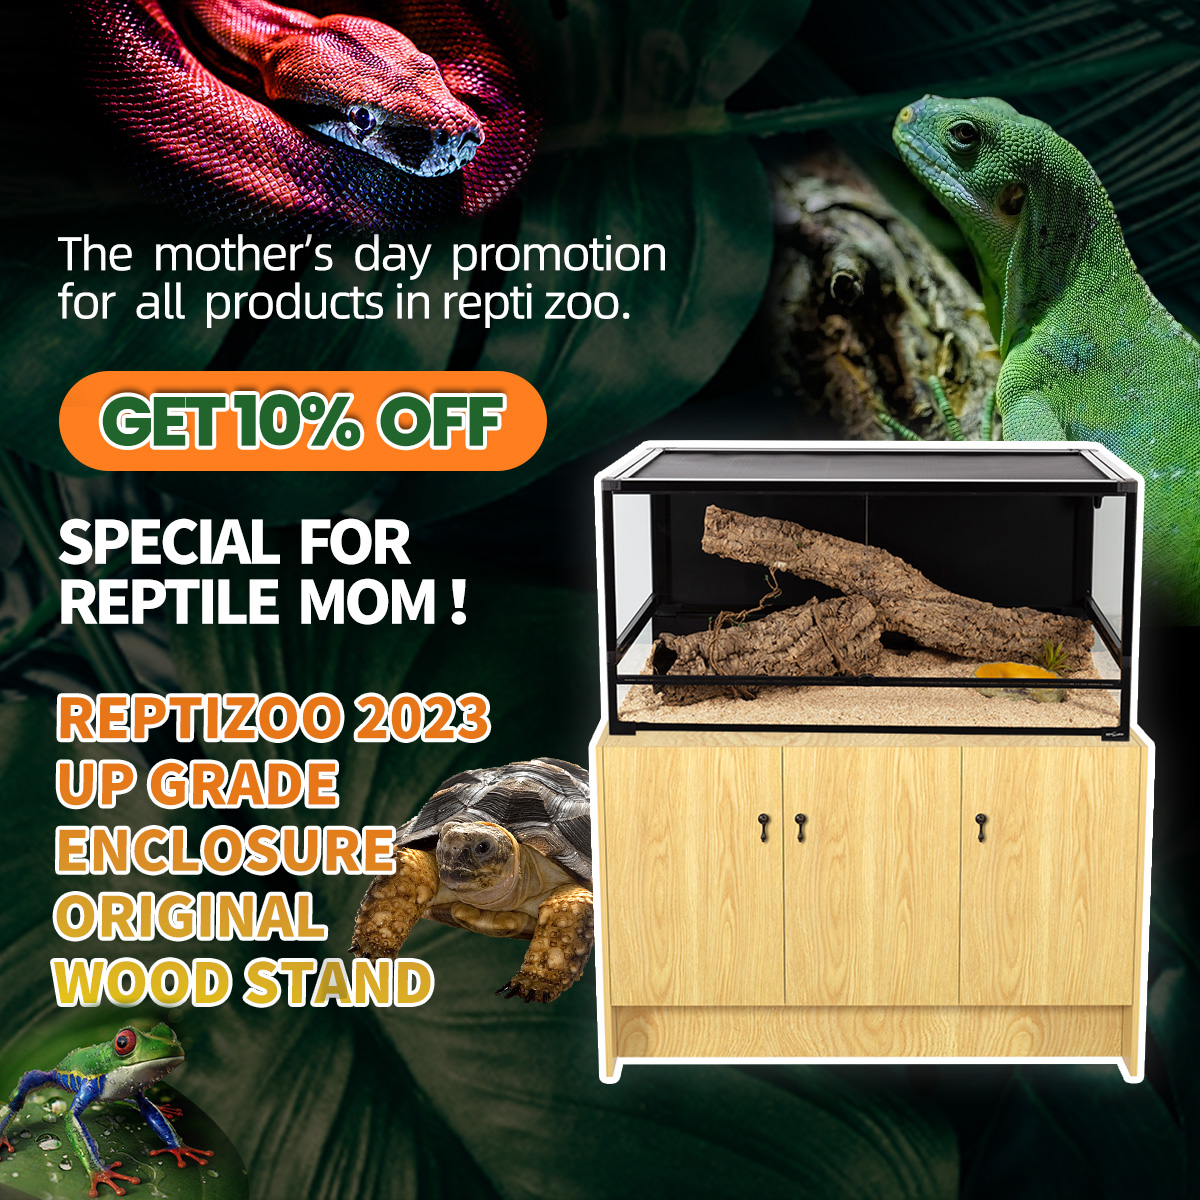 At Least Get 10% off the Mother’s Day Promotion for all products in REPTI ZOO

1). 10% off For ANY orders! CODE: RZ17
2). 12% OFF On Orders Over $2399, CODE: EMAKH
Learn More:🪱🐍🐢🦎 reptizoo.store
#tank #promotion #enclosure #reptiles #reptilesofinstagram #reptizoo